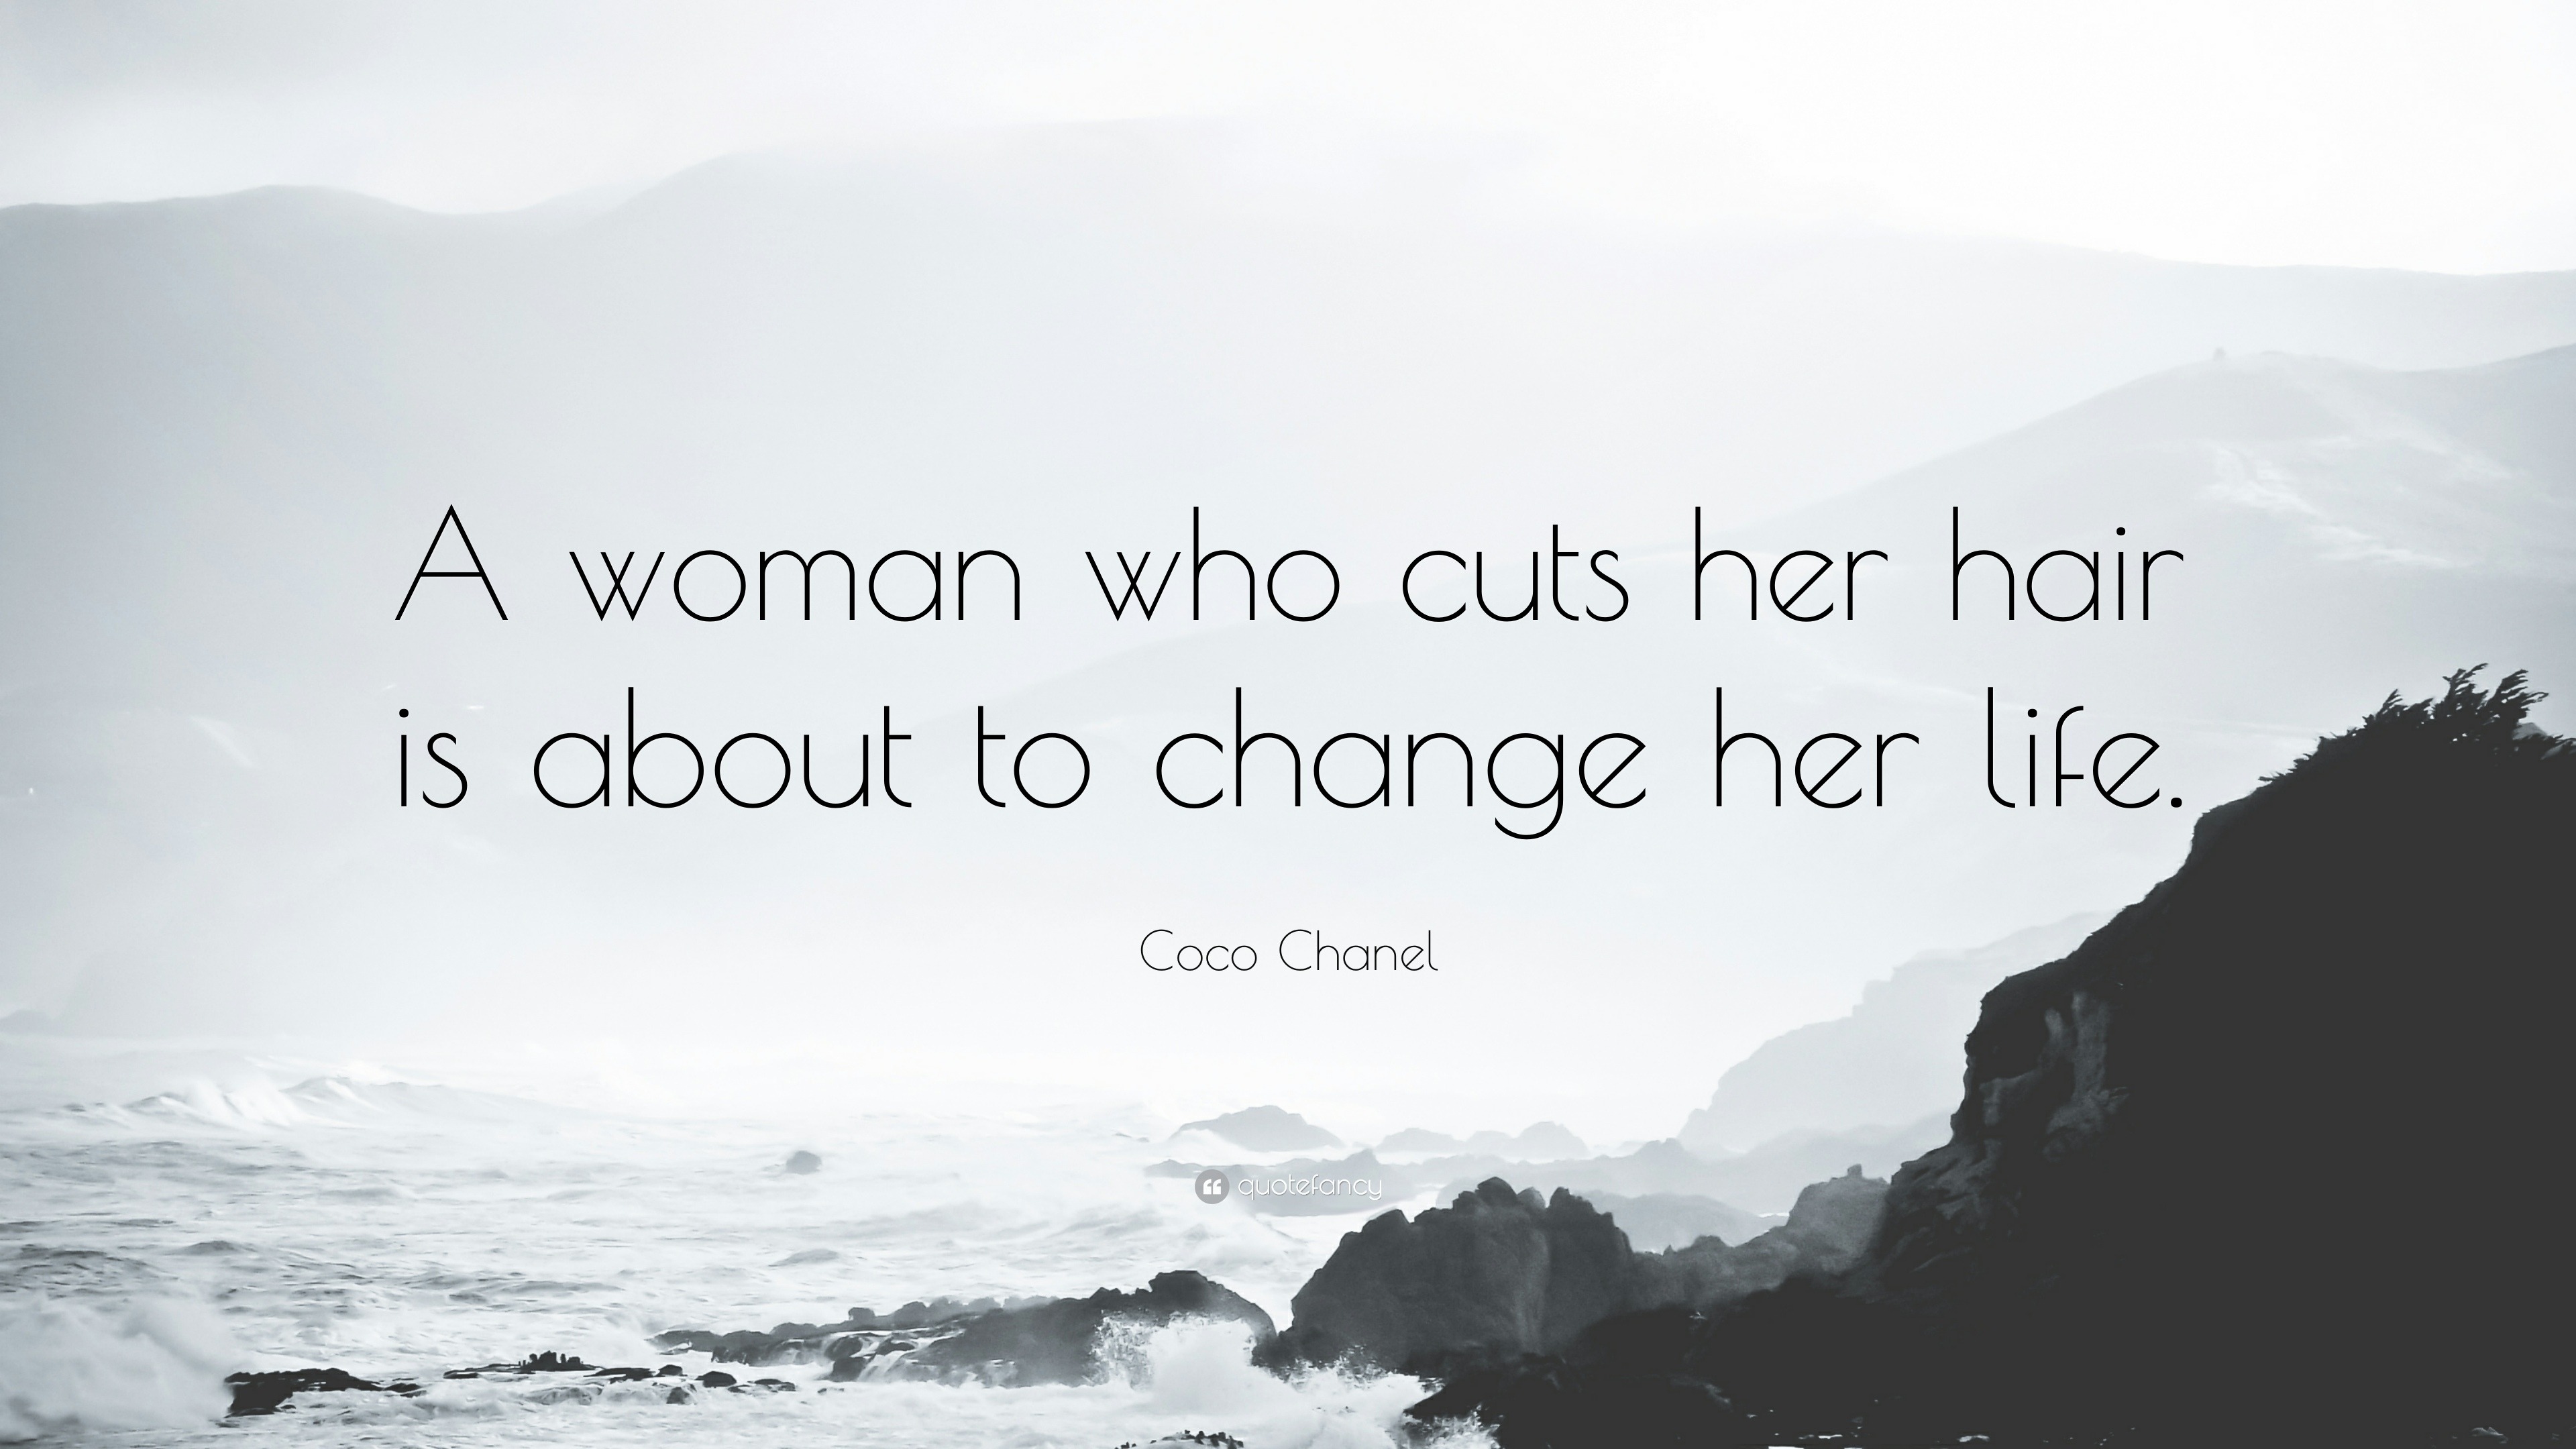 Coco Chanel Quote: “A woman who cuts her hair is about to change her life.”